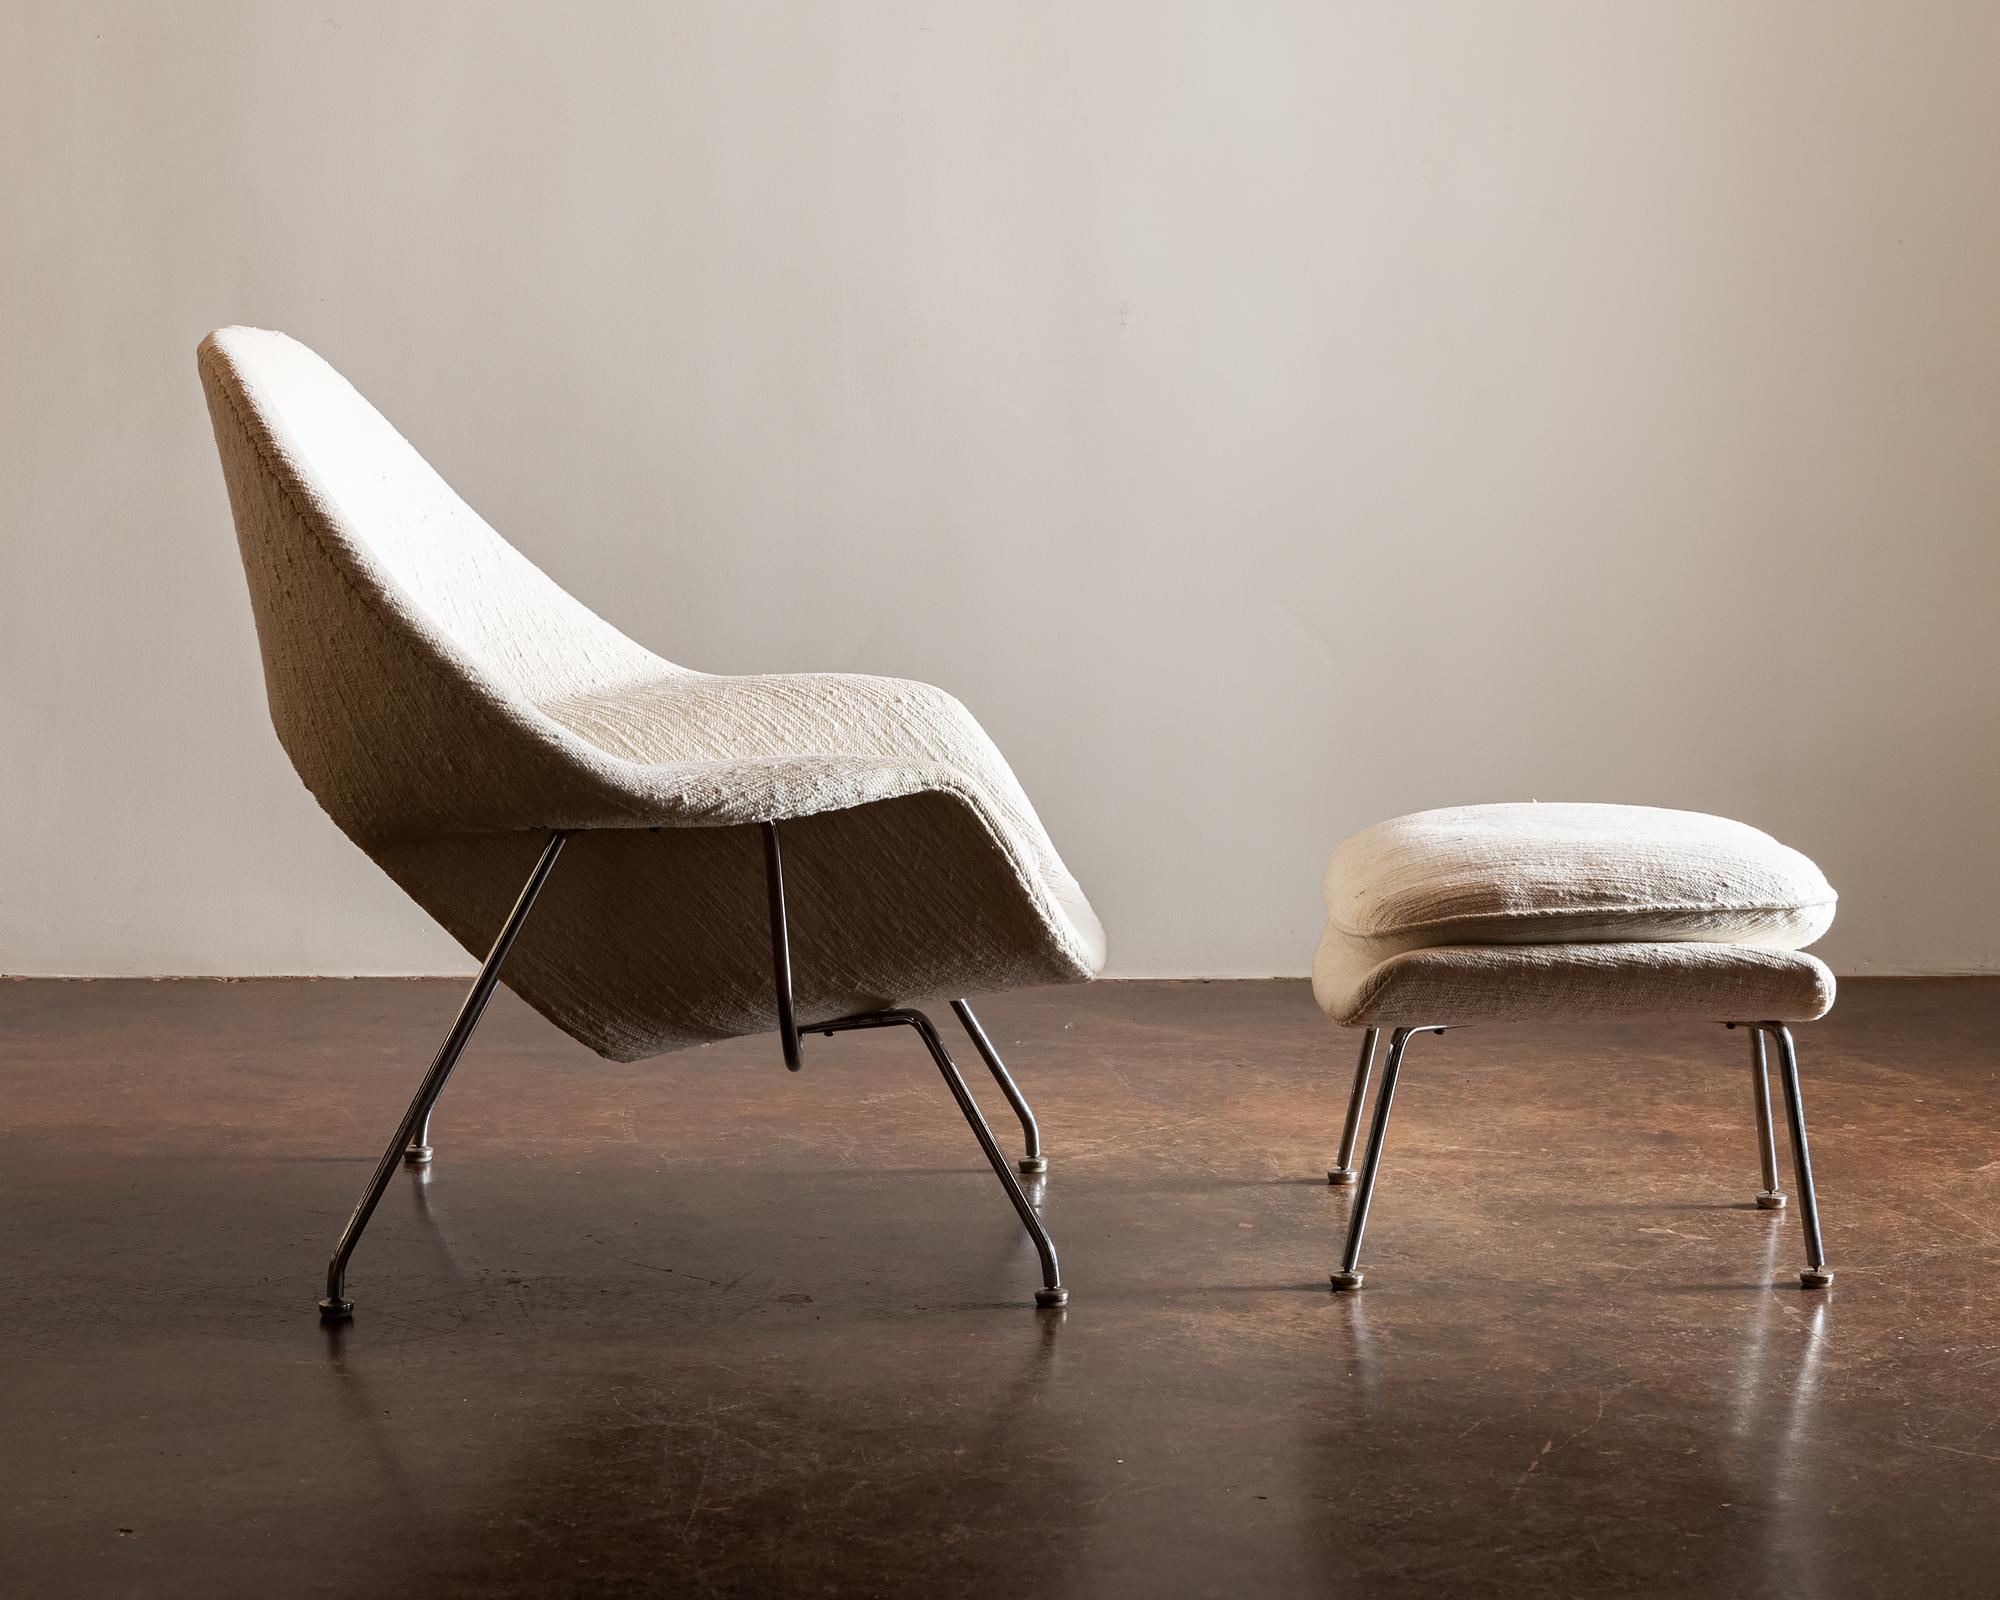 A nice example of the Womb chair and ottoman by Eero Saarinen for Knoll in original Knoll bouclé fabric. Late 20th century re-edition.